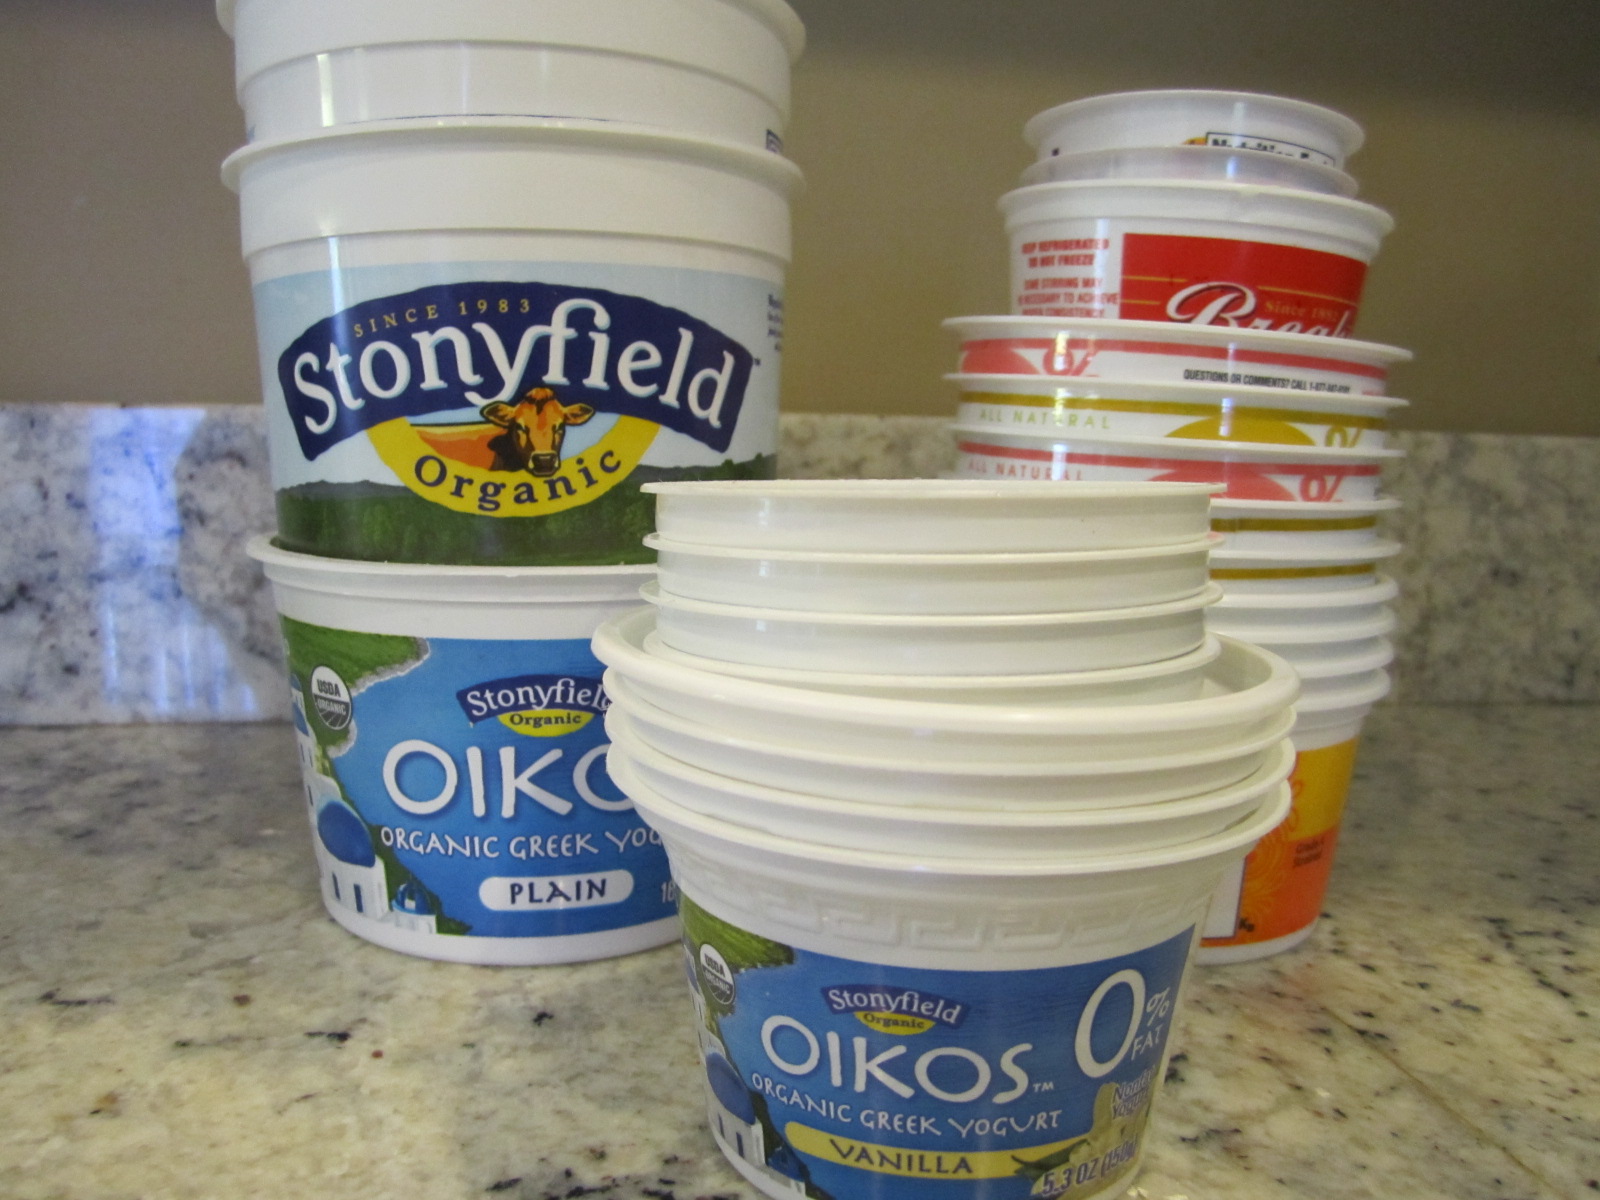 Are Yogurt Containers Recyclable?